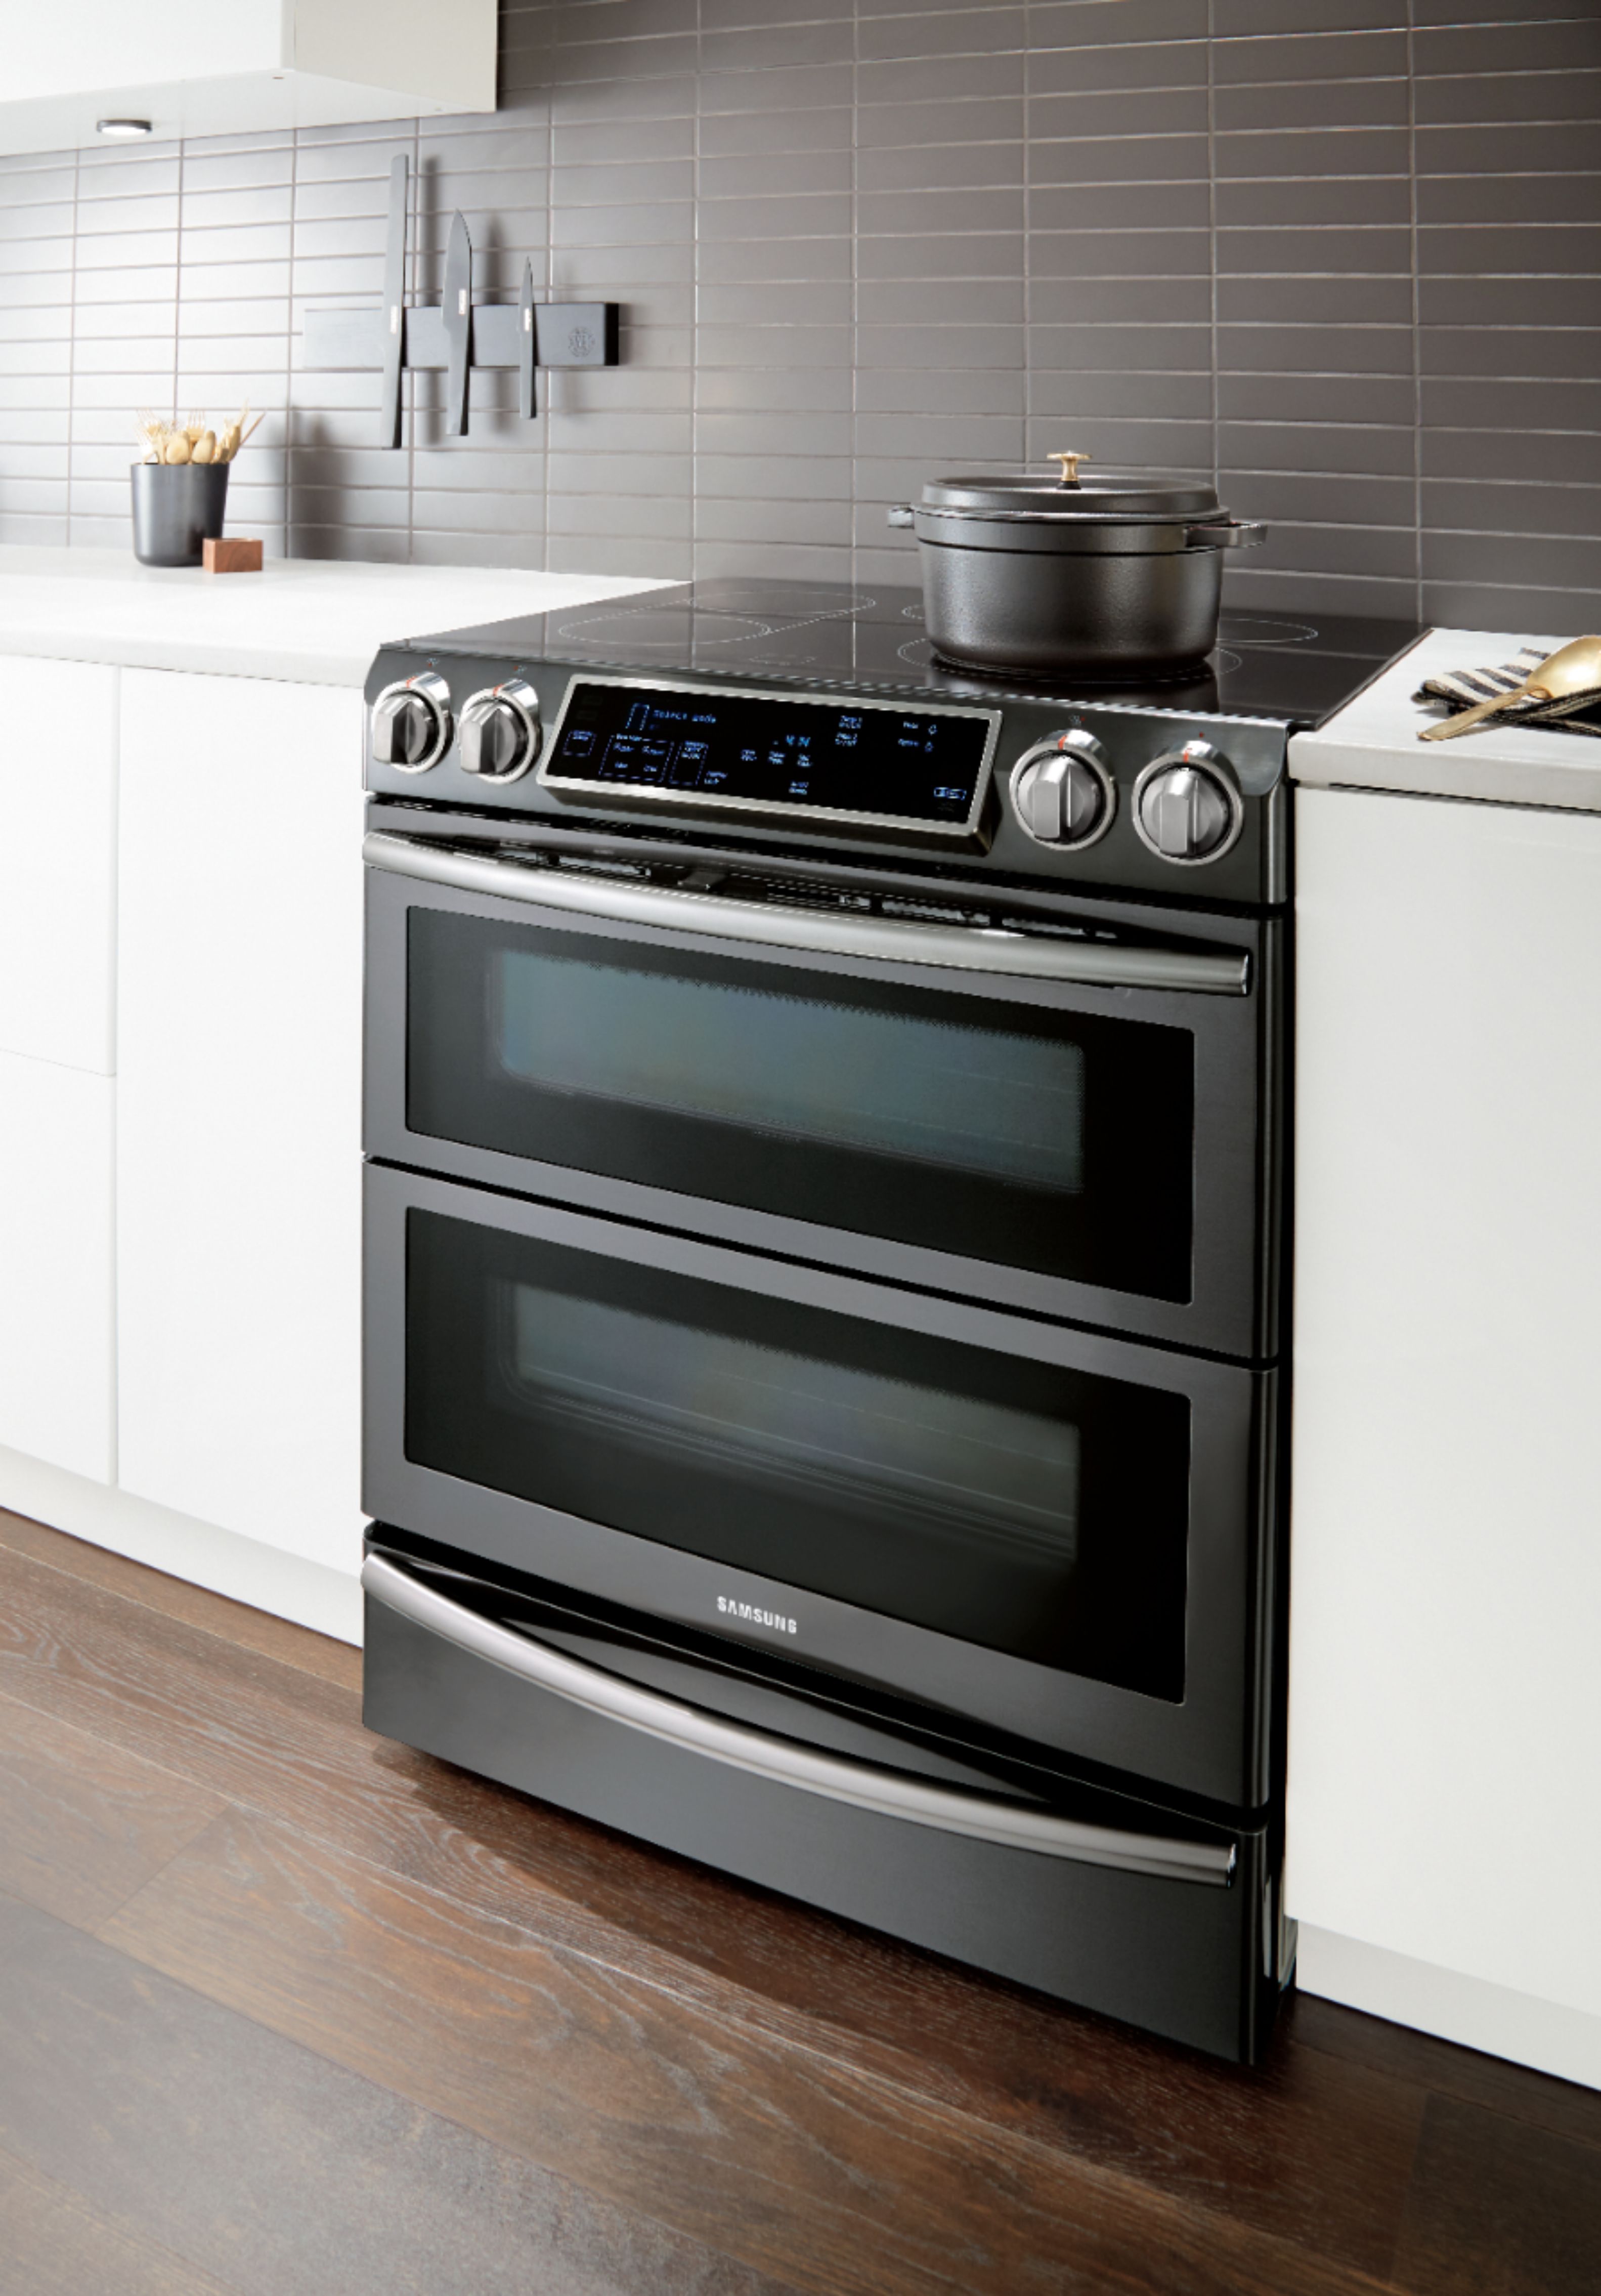 Samsung 5.8 Cu. Ft. Electric Flex Duo Self-Cleaning Fingerprint Samsung Flex Duo Electric Range Black Stainless Steel